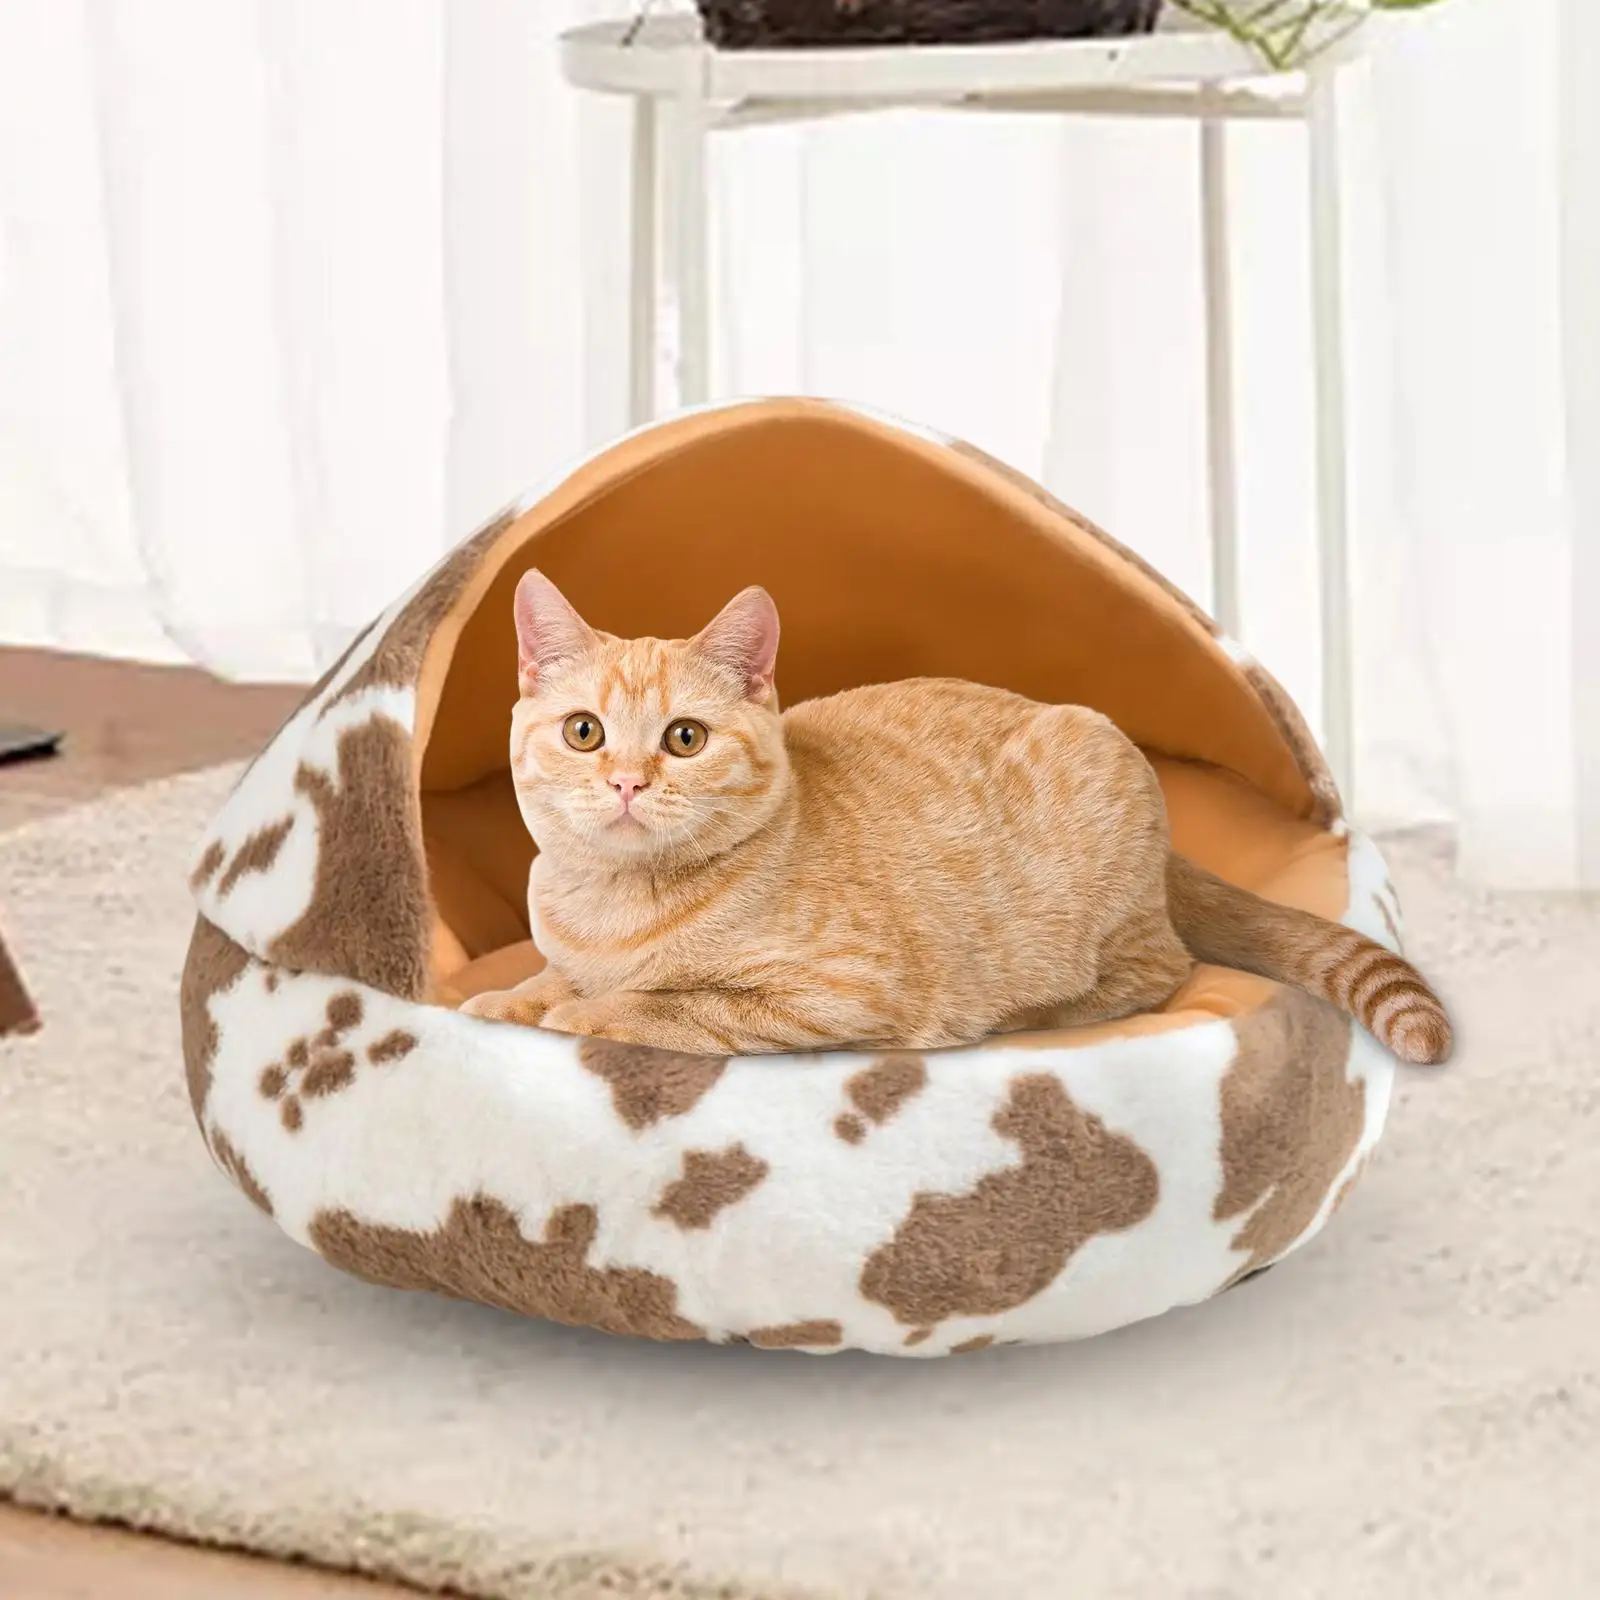 Warm Pet House Dog Tent Nonslip Bottom Self Warming Soft Cushion Nest Cave Cat Bed for Kitty Small Medium Dog Indoor Cats Puppy